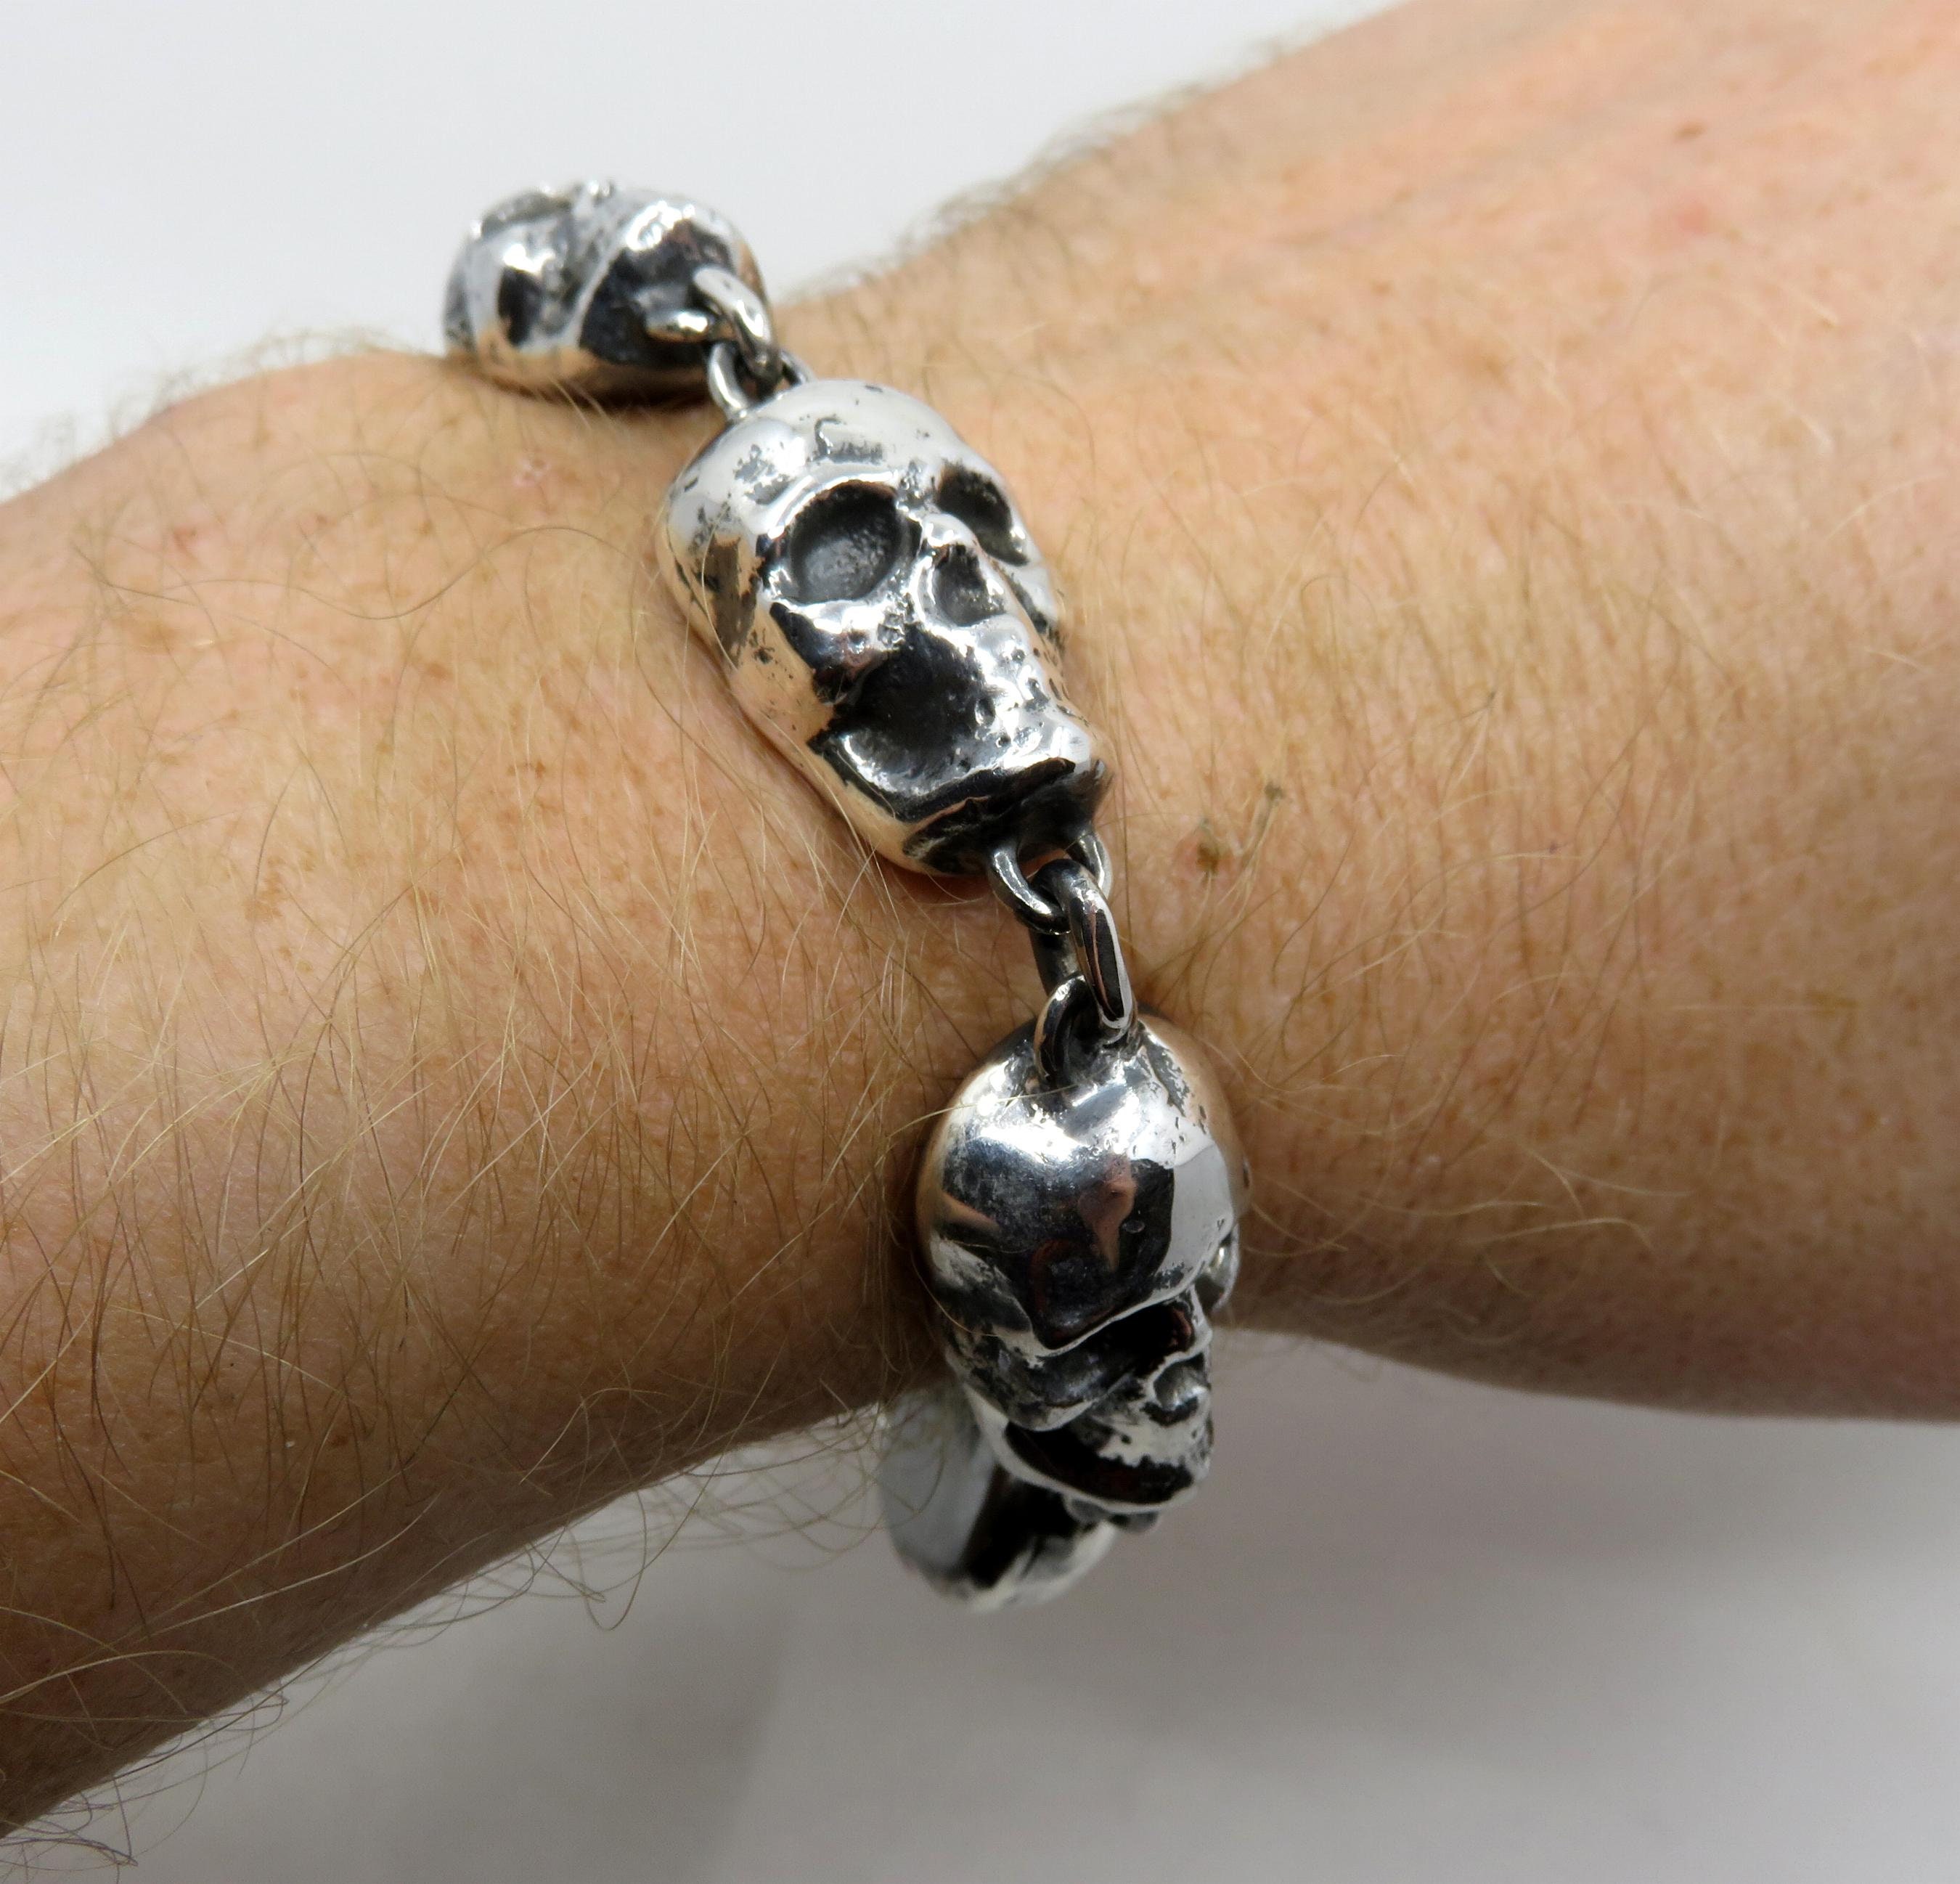 Matt bracelet made of surgical steel, silver colour, shiny H joints